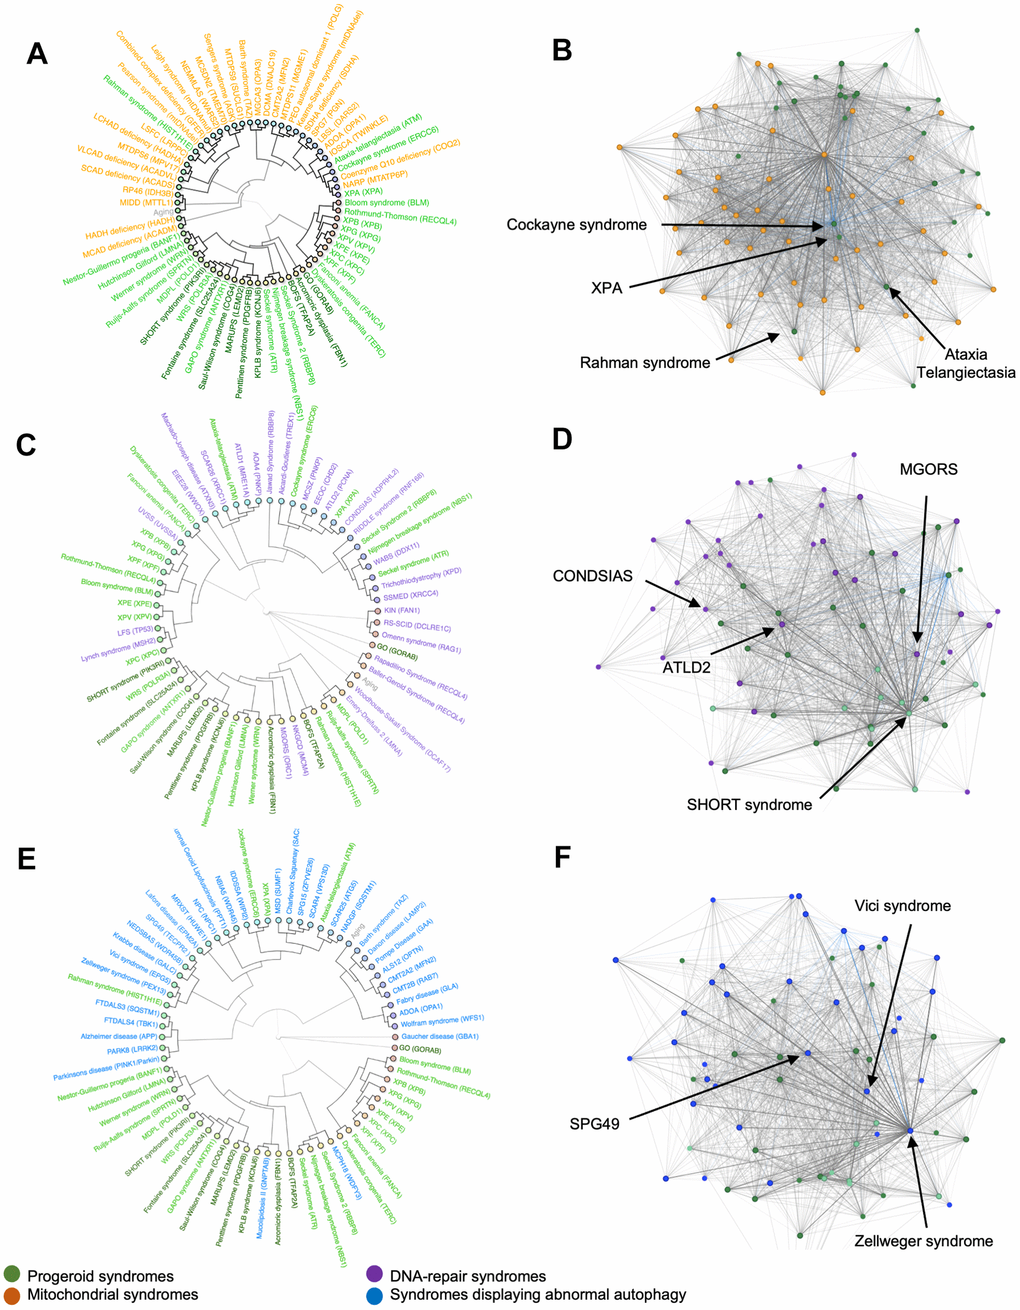 Hierarchical clusters and syndrome networks. Agglomerative hierarchical clustering and network algorithms of mitochondrial syndromes (A, B), DNA-repair syndromes (C, D) and syndromes with abnormal autophagy (E, F).